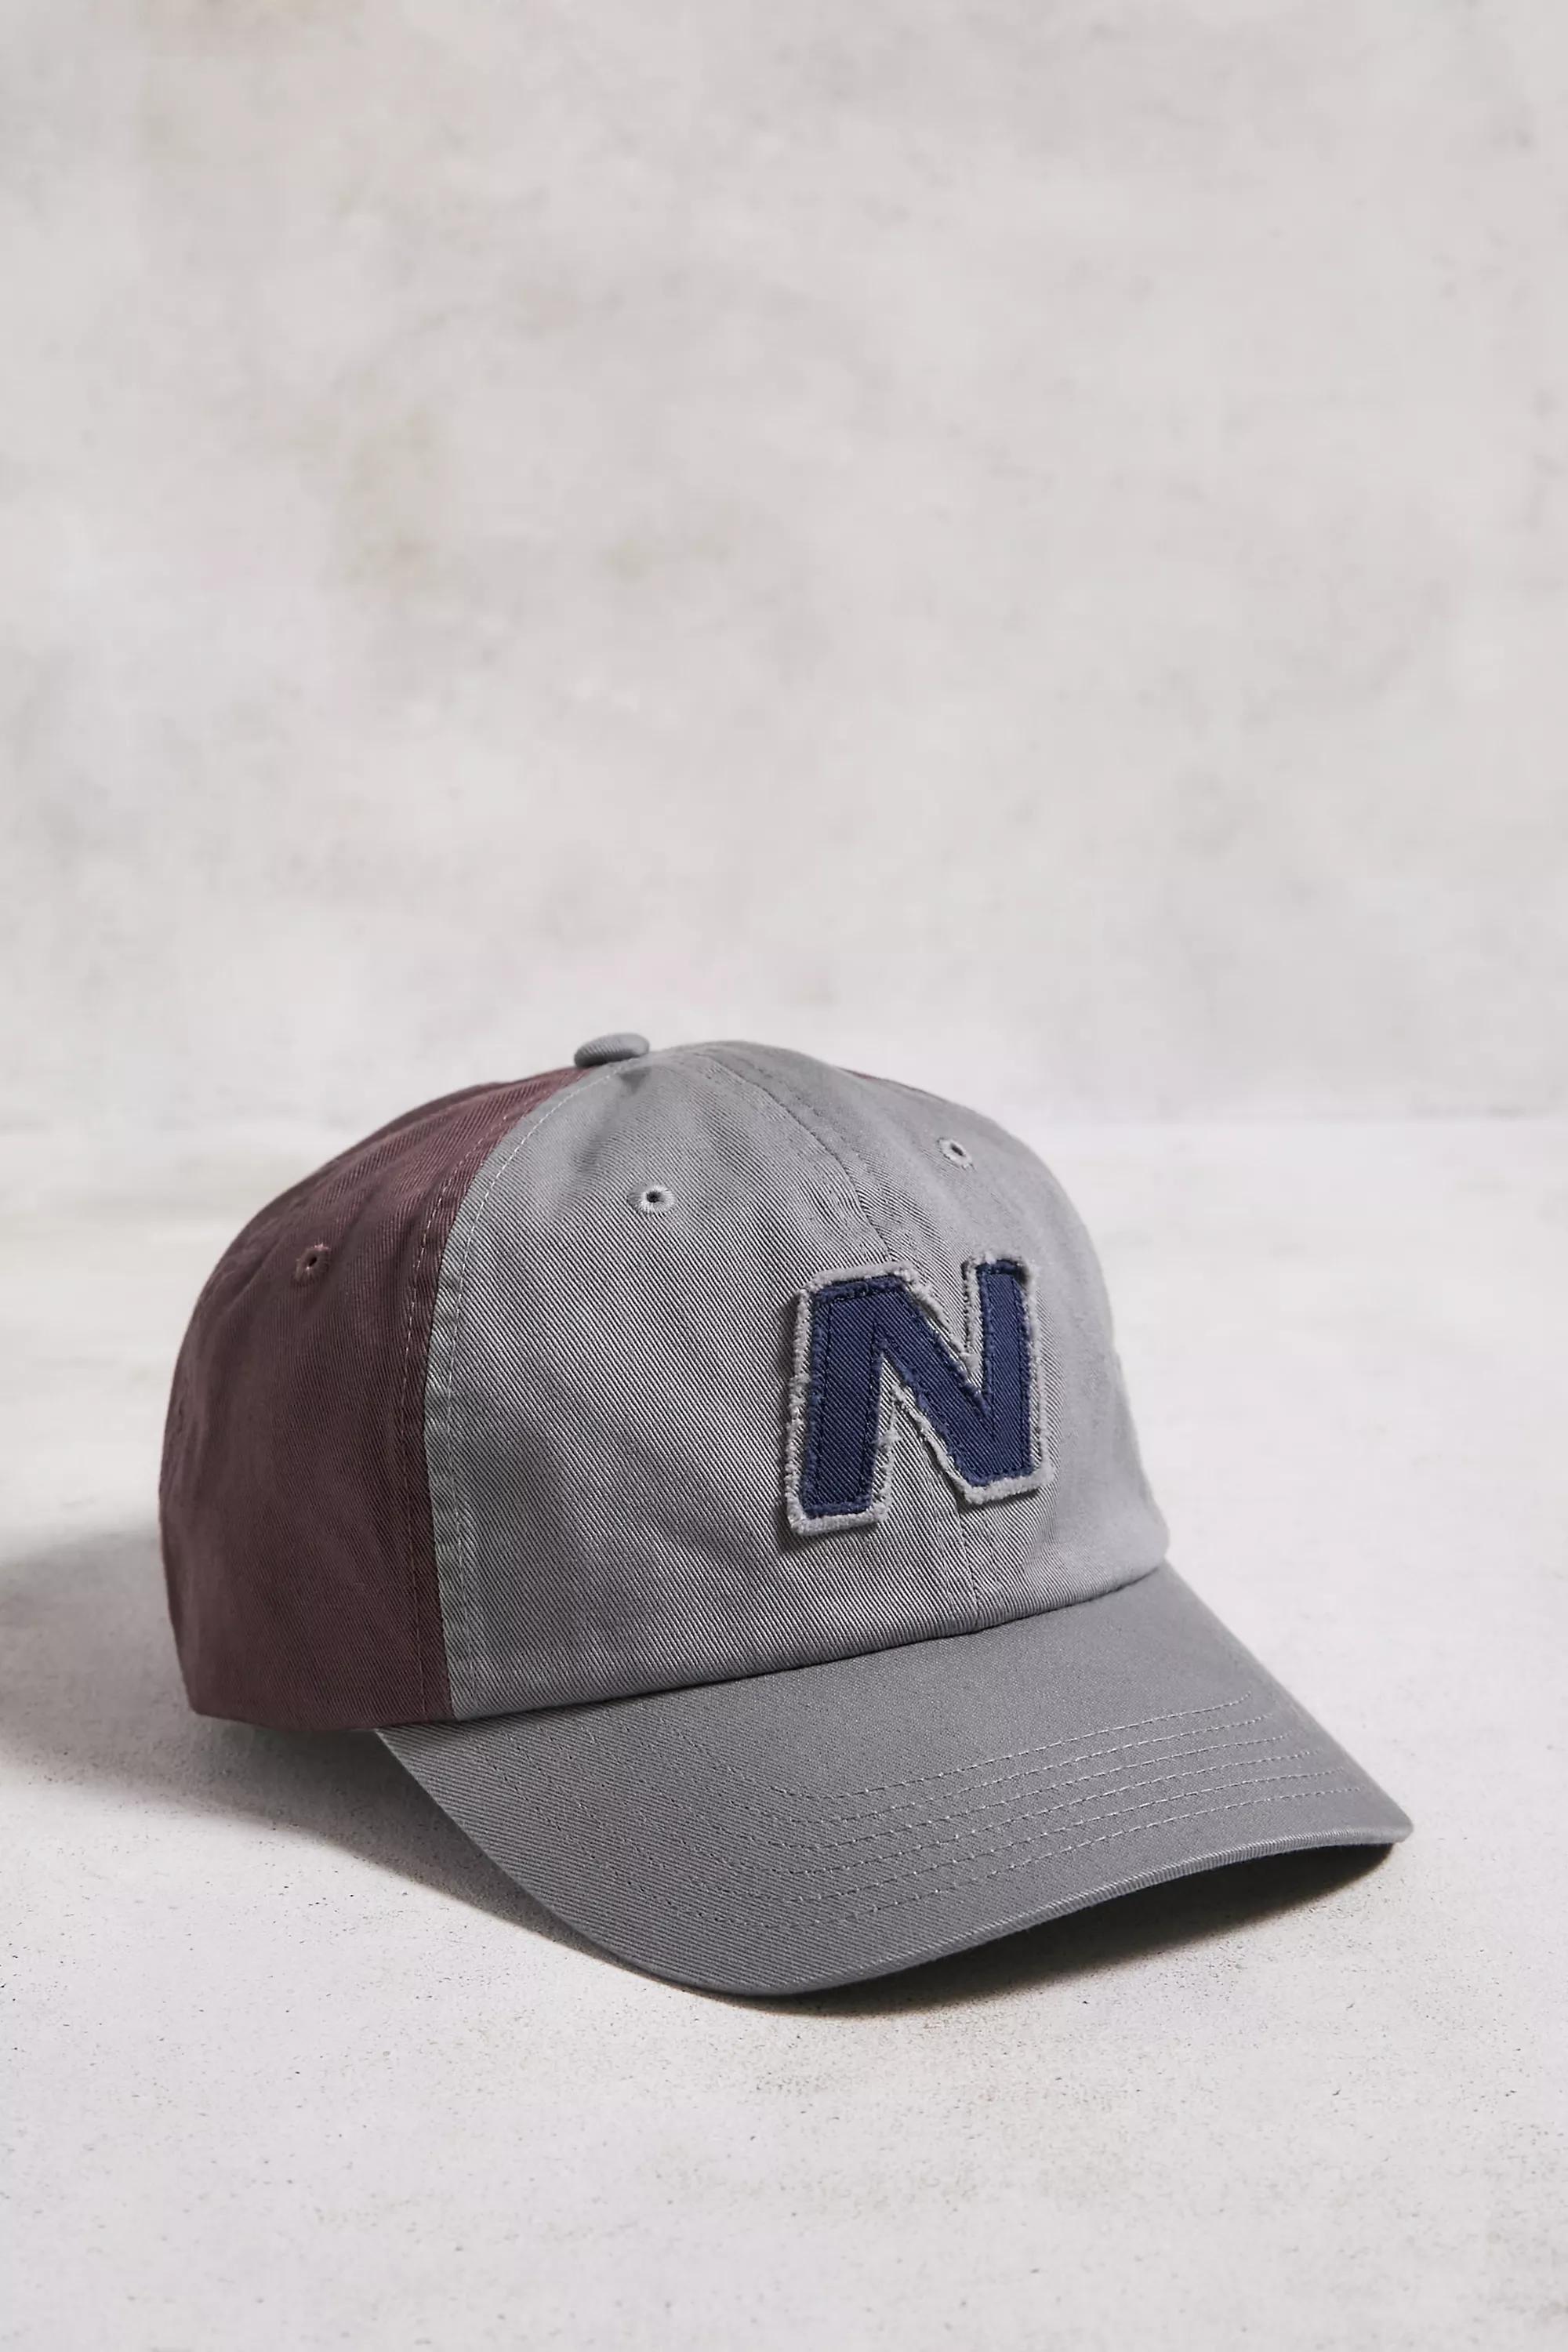 Urban Outfitters - Grey New Balance Colour Block Cap